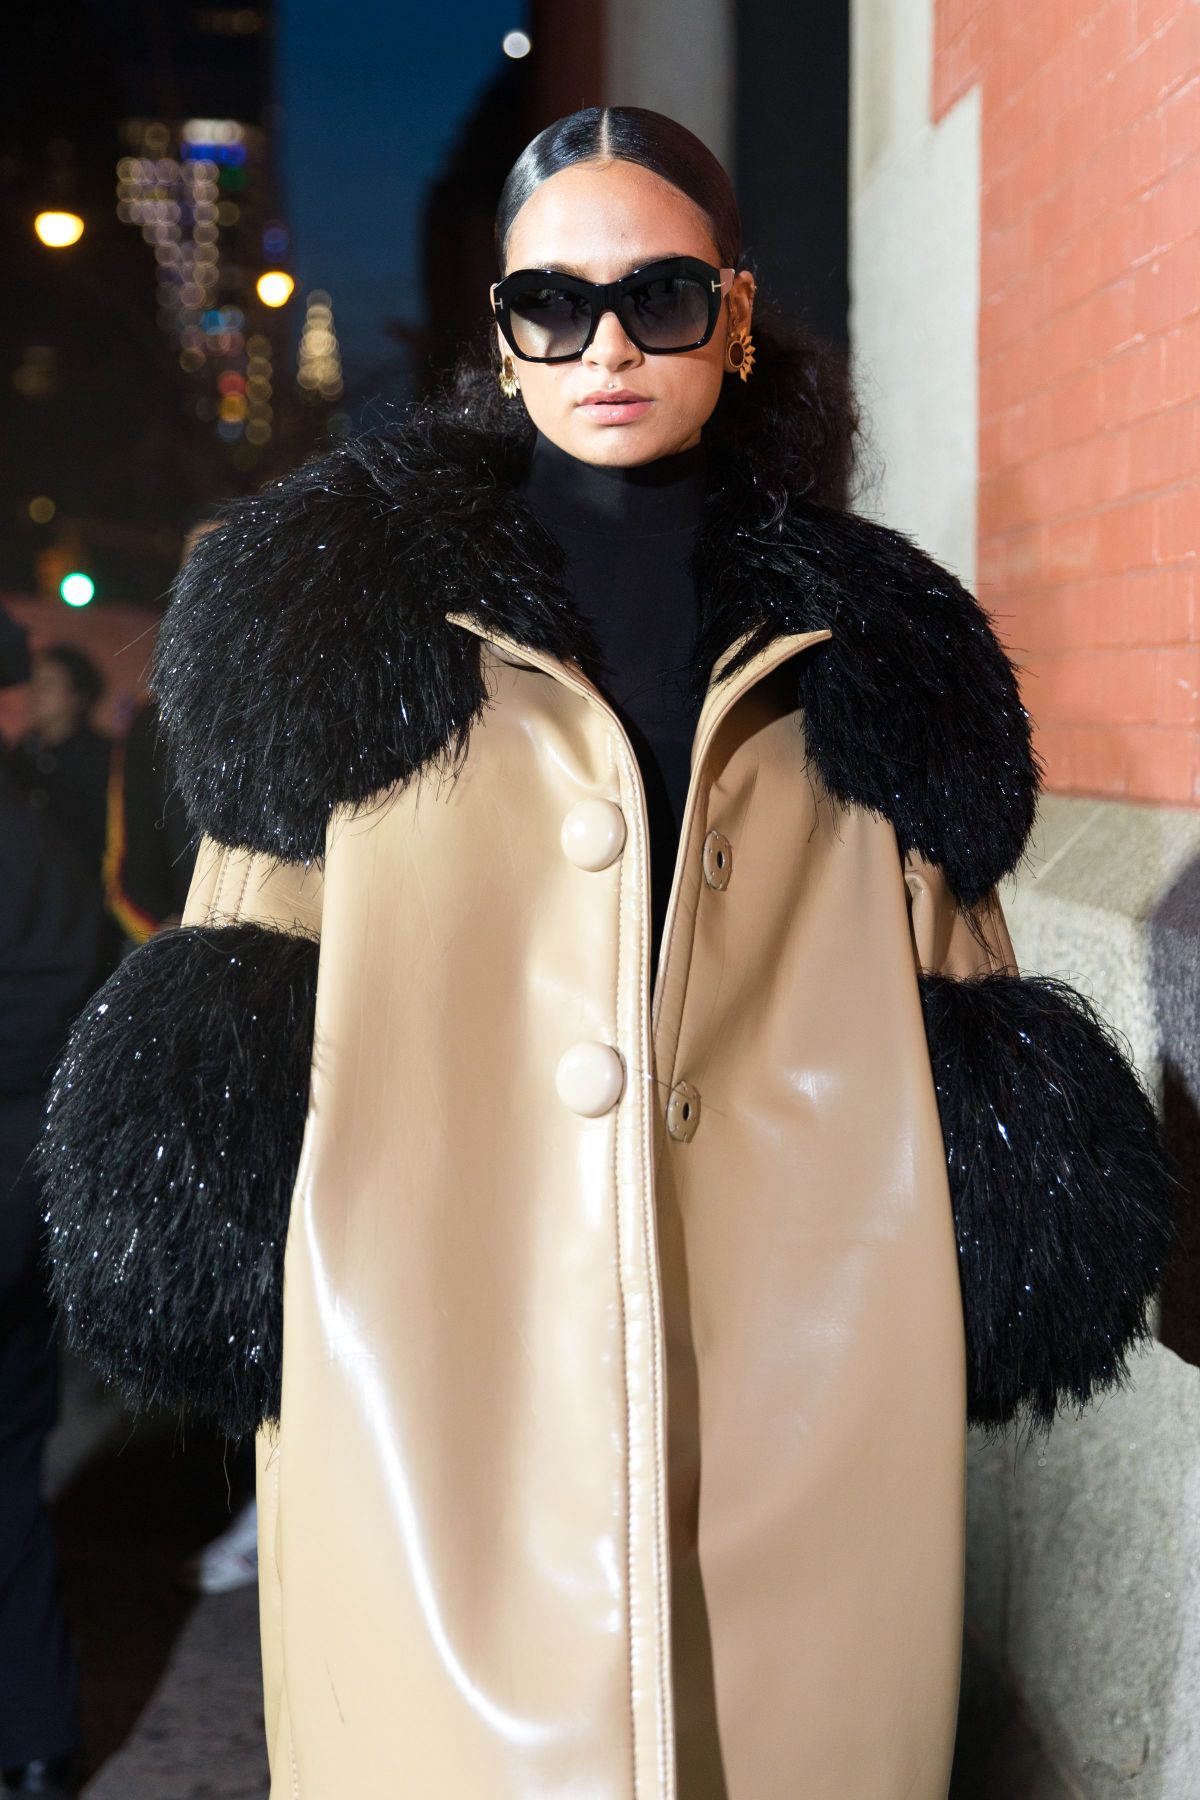 kehlani-at-marc-jacobs-fashion-show-at-nyfw-in-new-york-02-14-2018-1.jpg